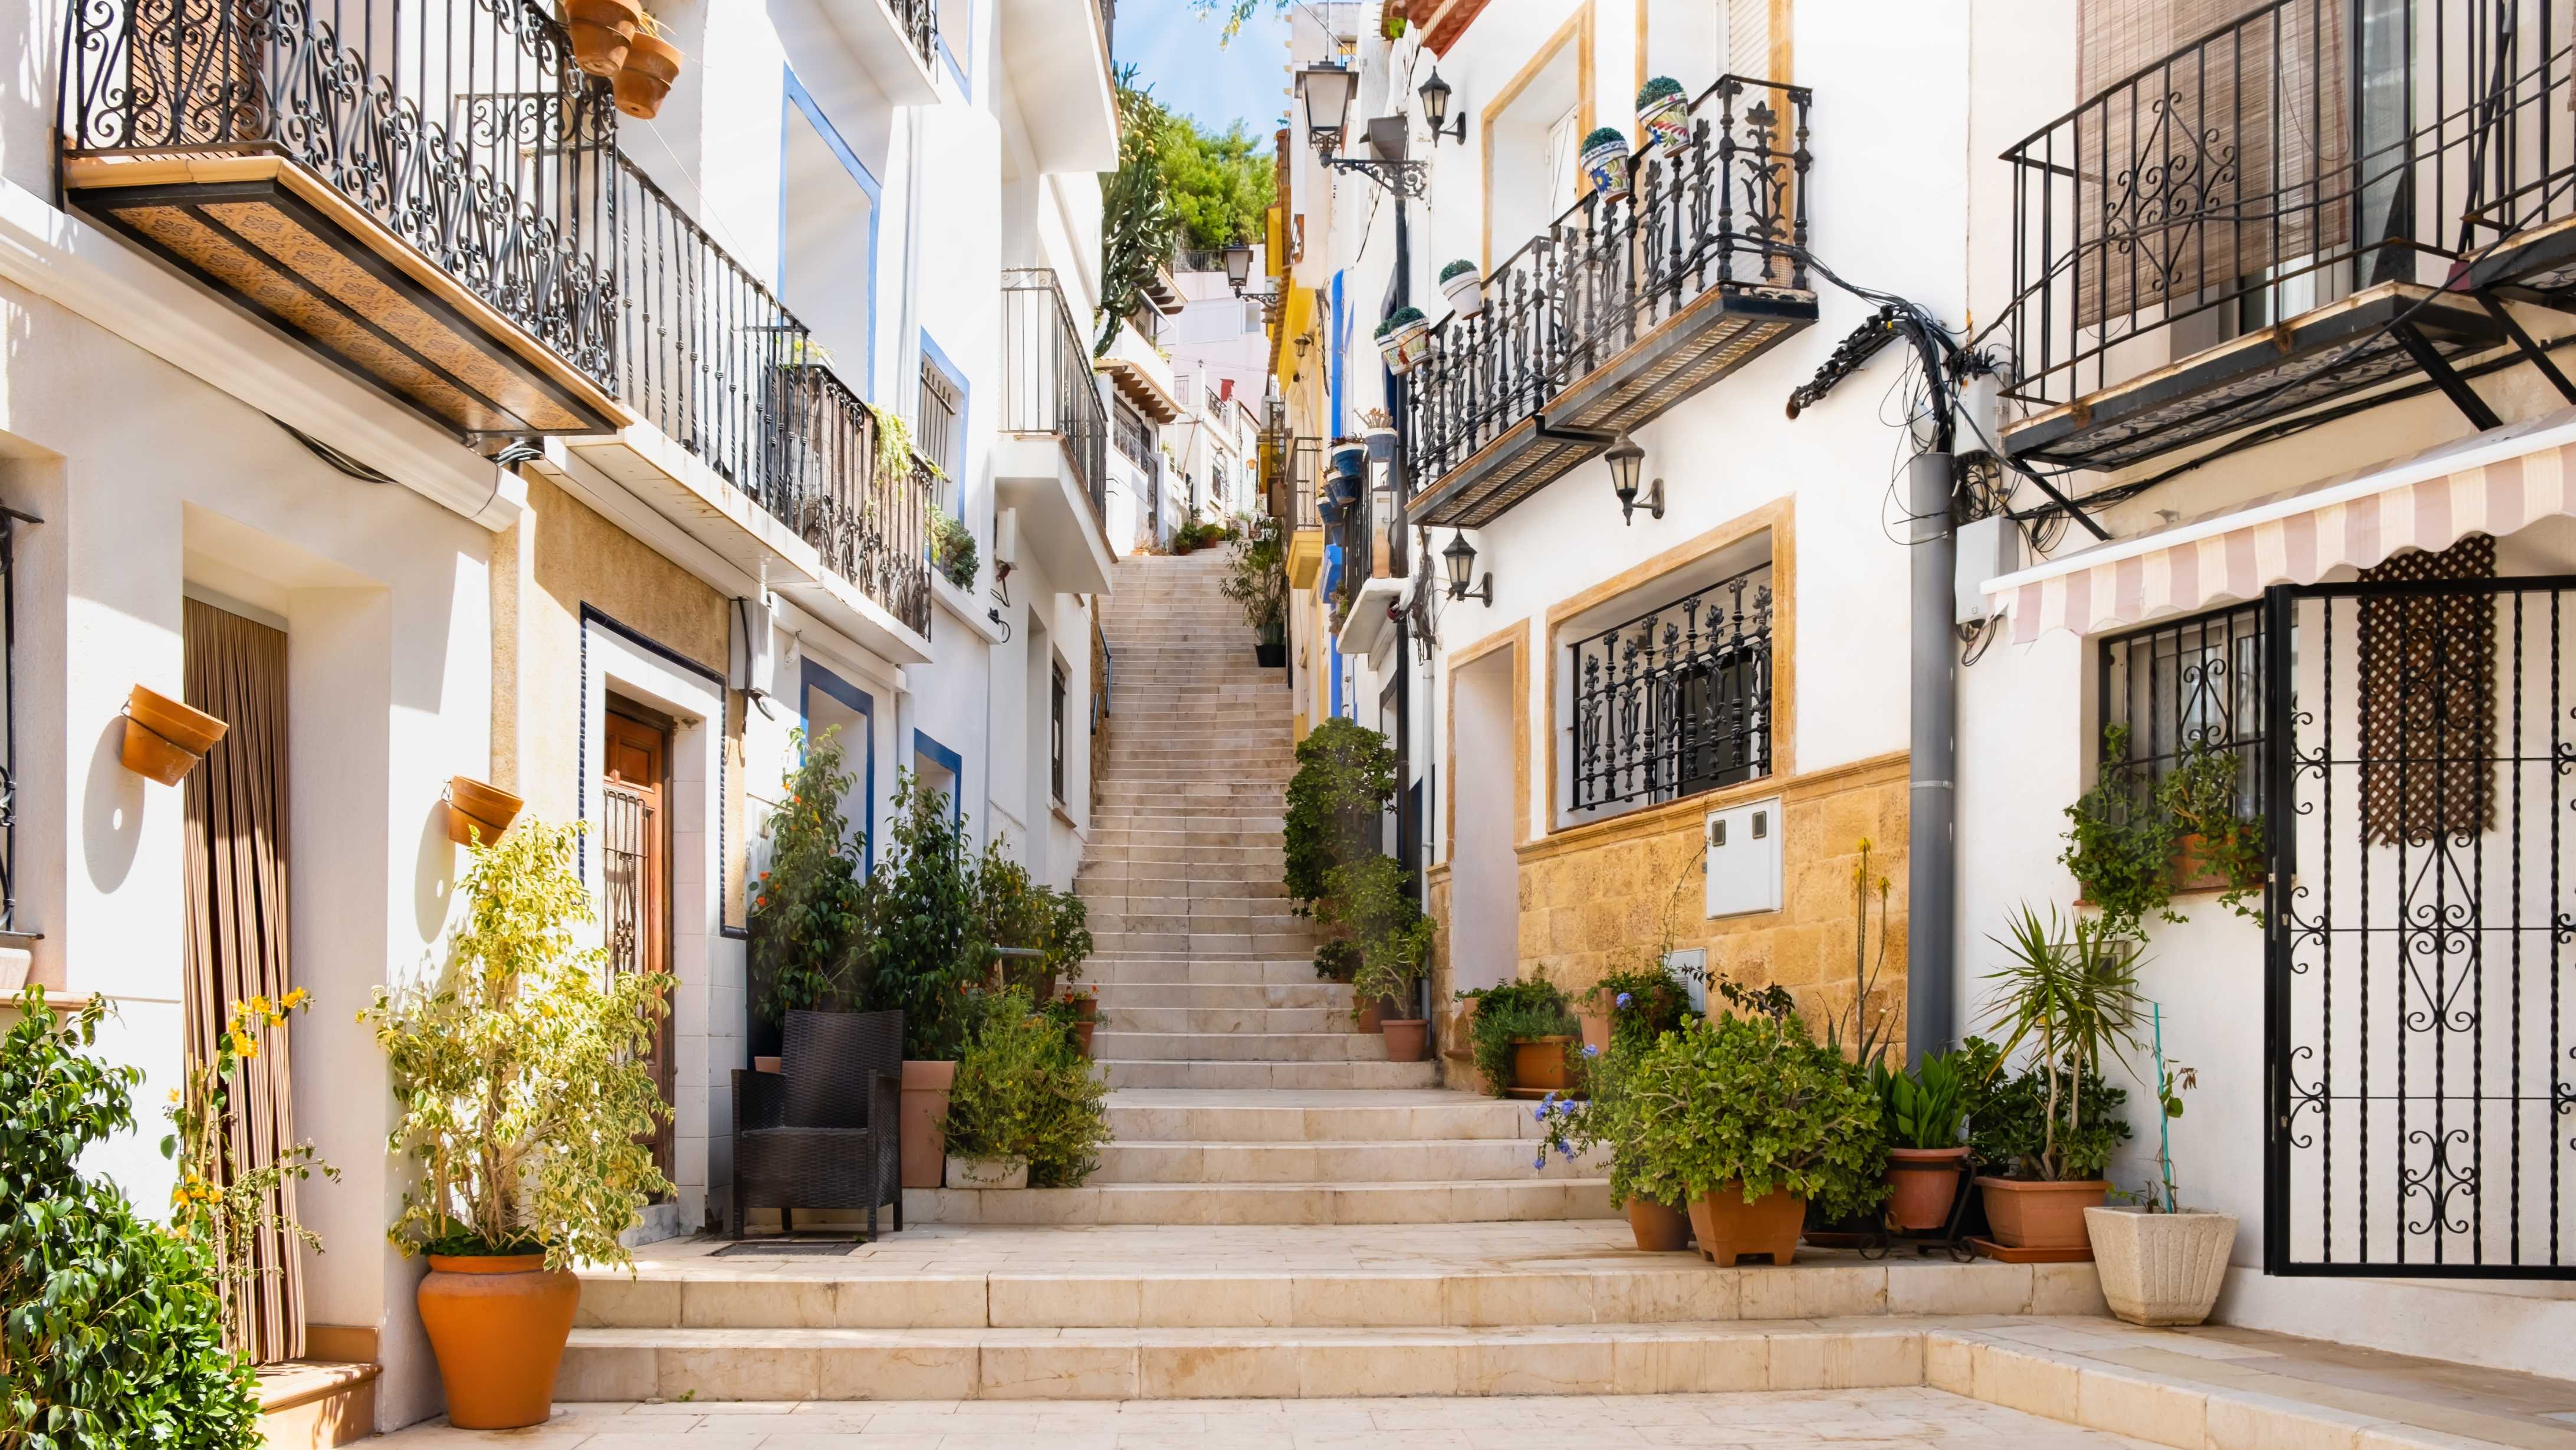 narrow-street-with-stairs-and-white-houses-in-alic-2021-11-02-17-32-13-utc_1.jpg